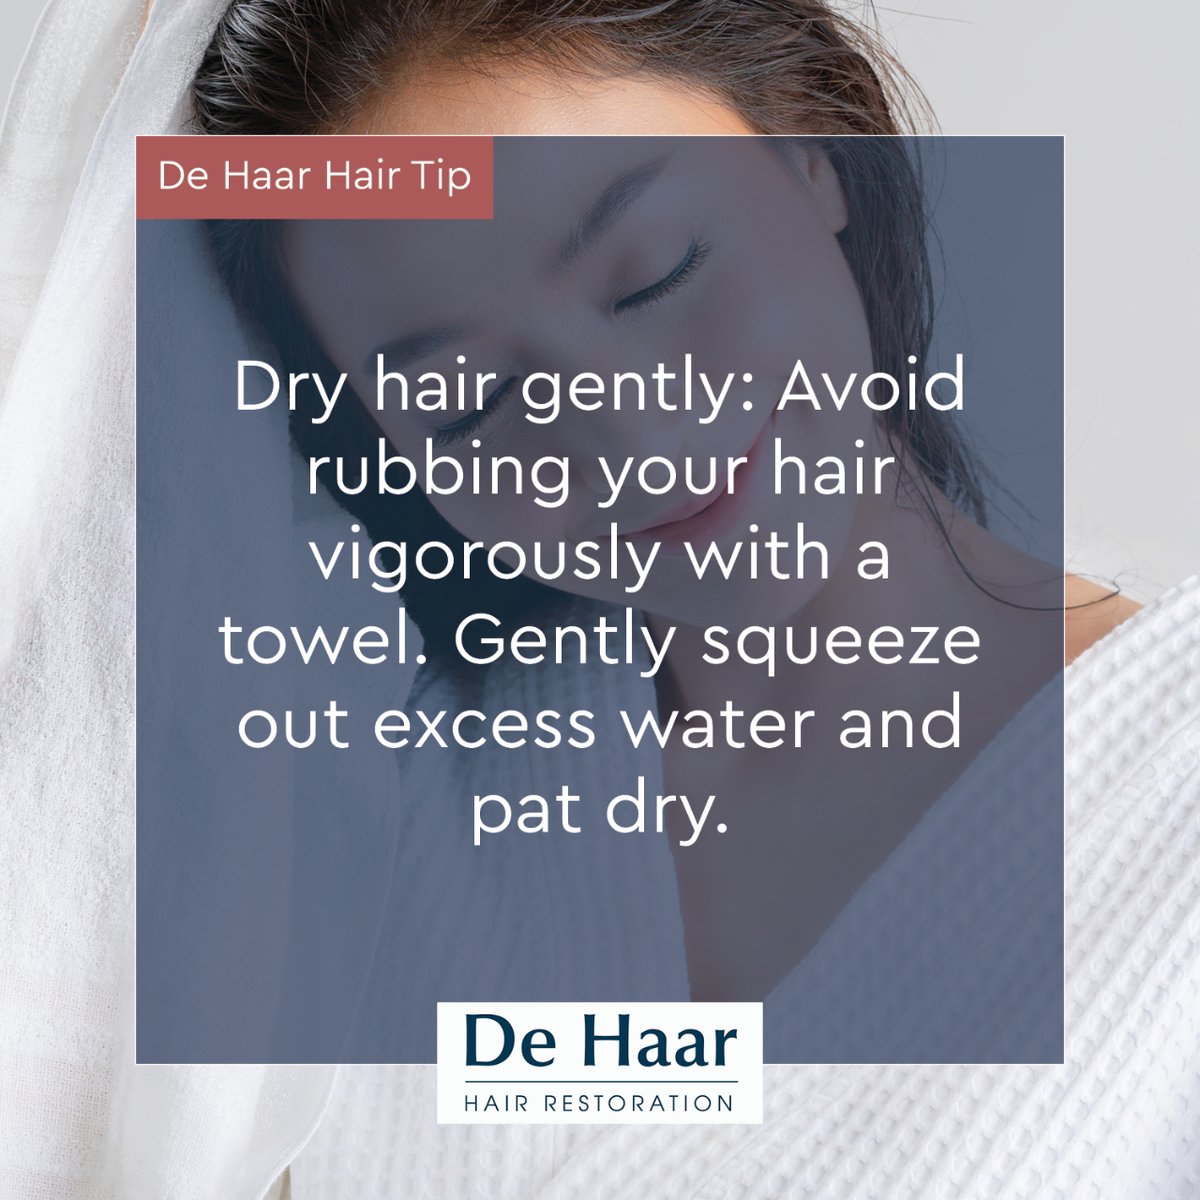 Treat your hair with care when it’s wet. Instead of rubbing vigorously with a towel, gently squeeze out excess water and pat dry. This gentle drying method helps minimize frizz and breakage, keeping your hair in optimal condition. #GentleHairCare #MinimizeFrizz #HealthyHairTips